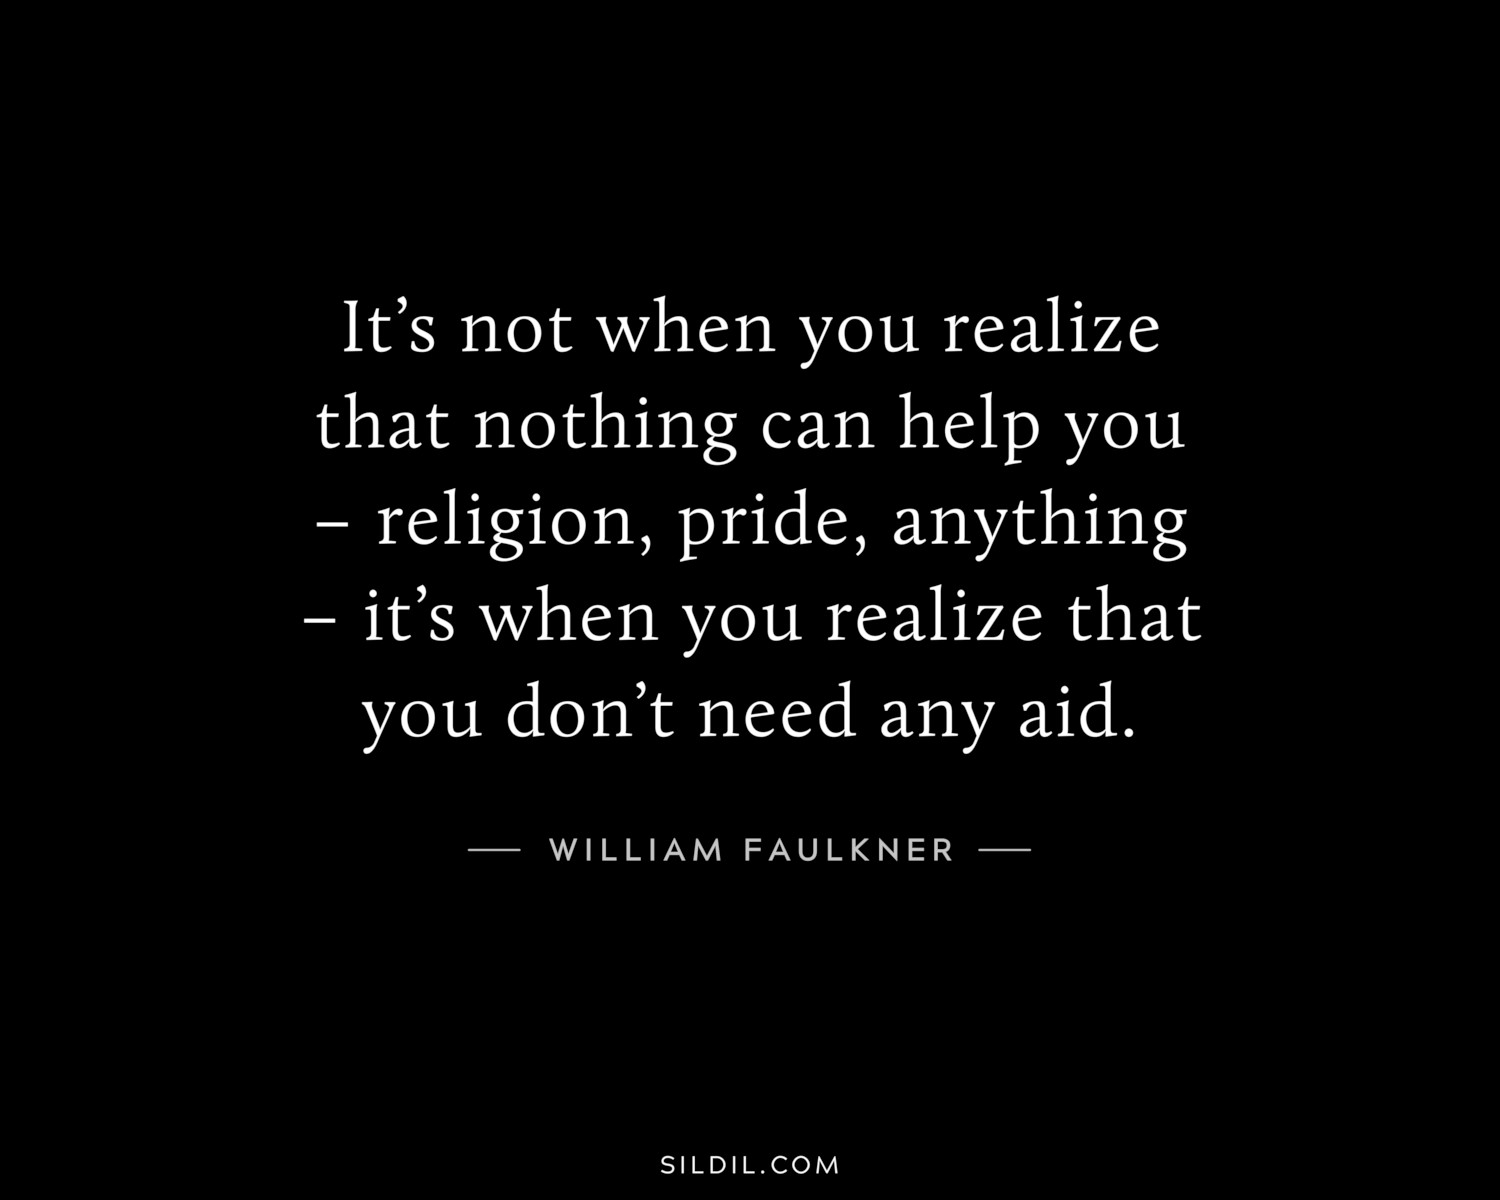 It’s not when you realize that nothing can help you – religion, pride, anything – it’s when you realize that you don’t need any aid.